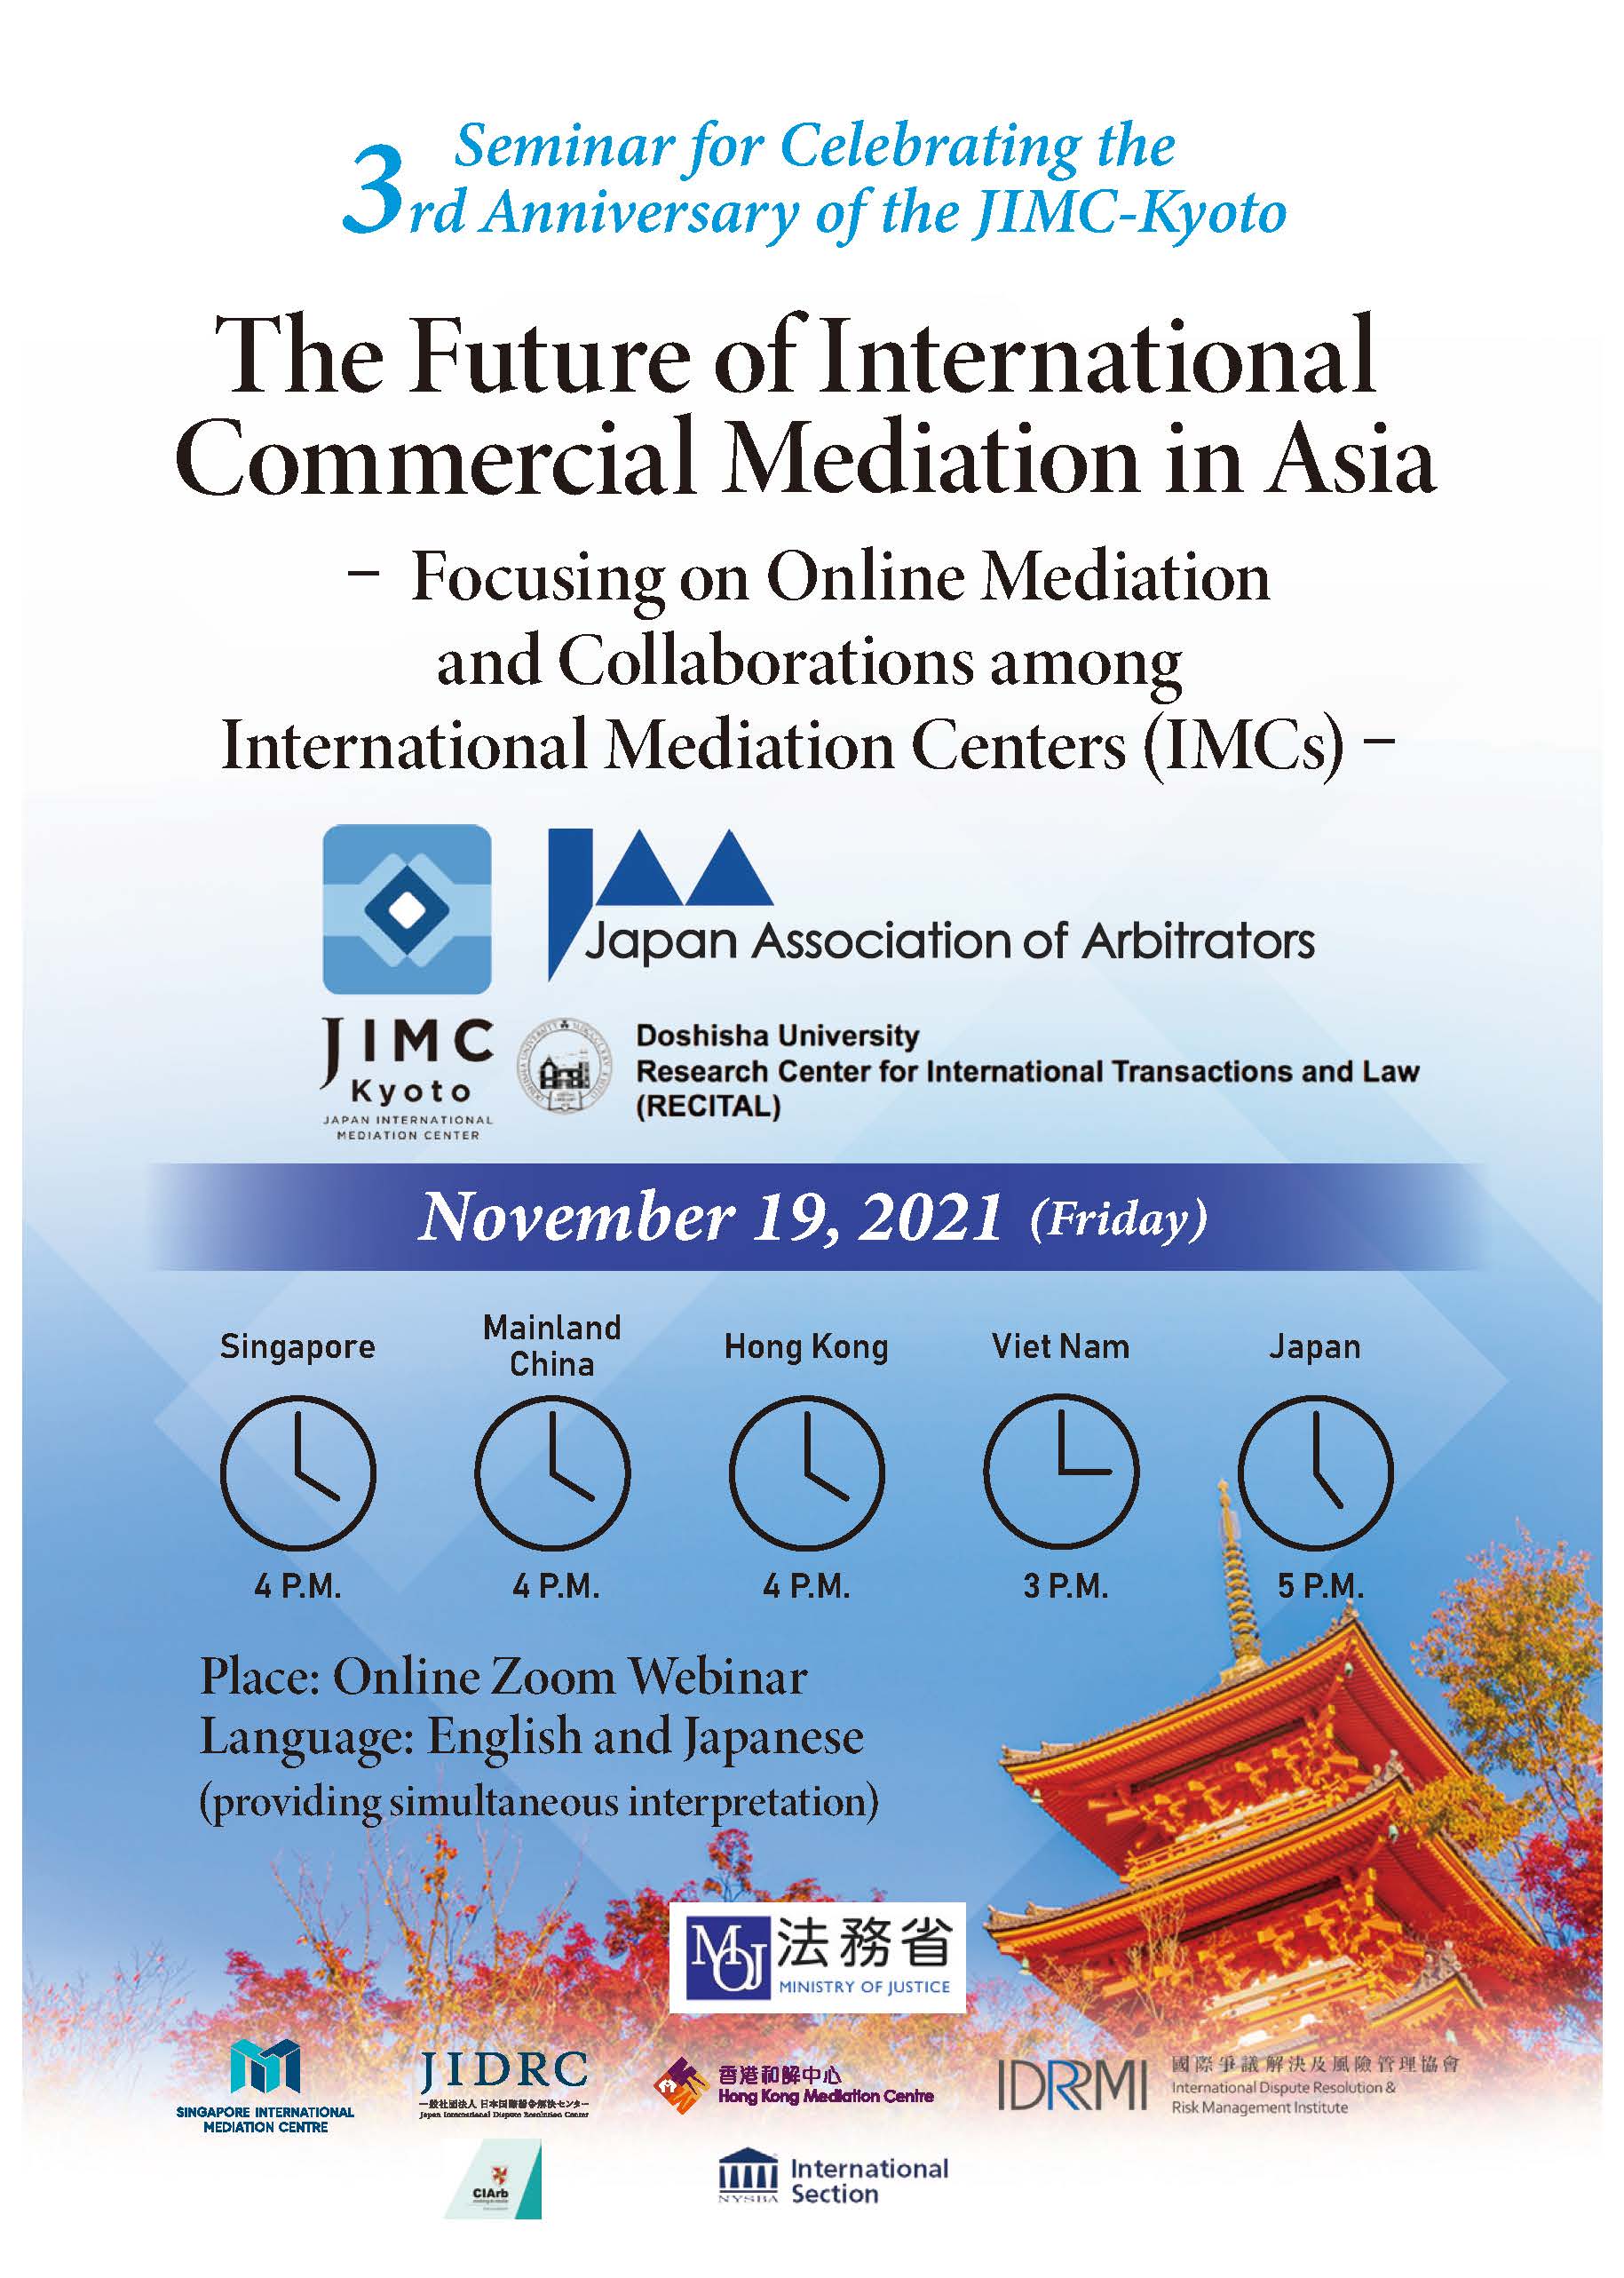 The Future of International Commercial Mediation in Asia_20211106 (1)_页面_1